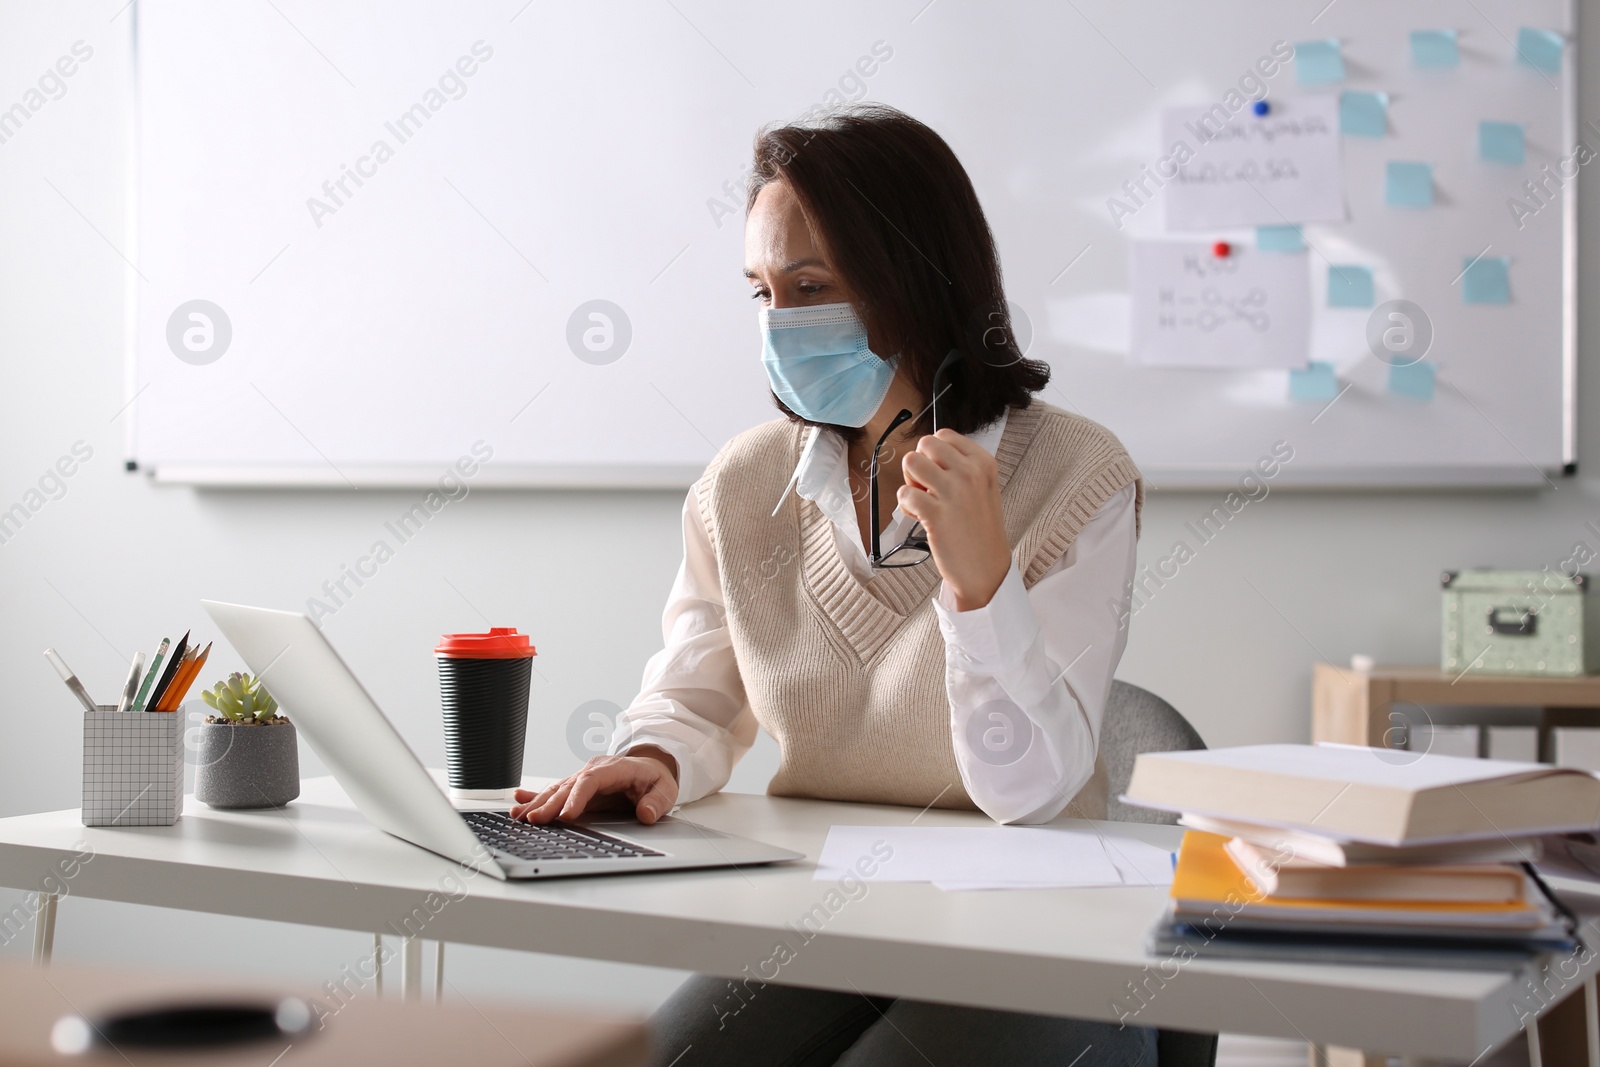 Photo of Teacher with protective mask conducting online lesson in classroom during COVID-19 quarantine